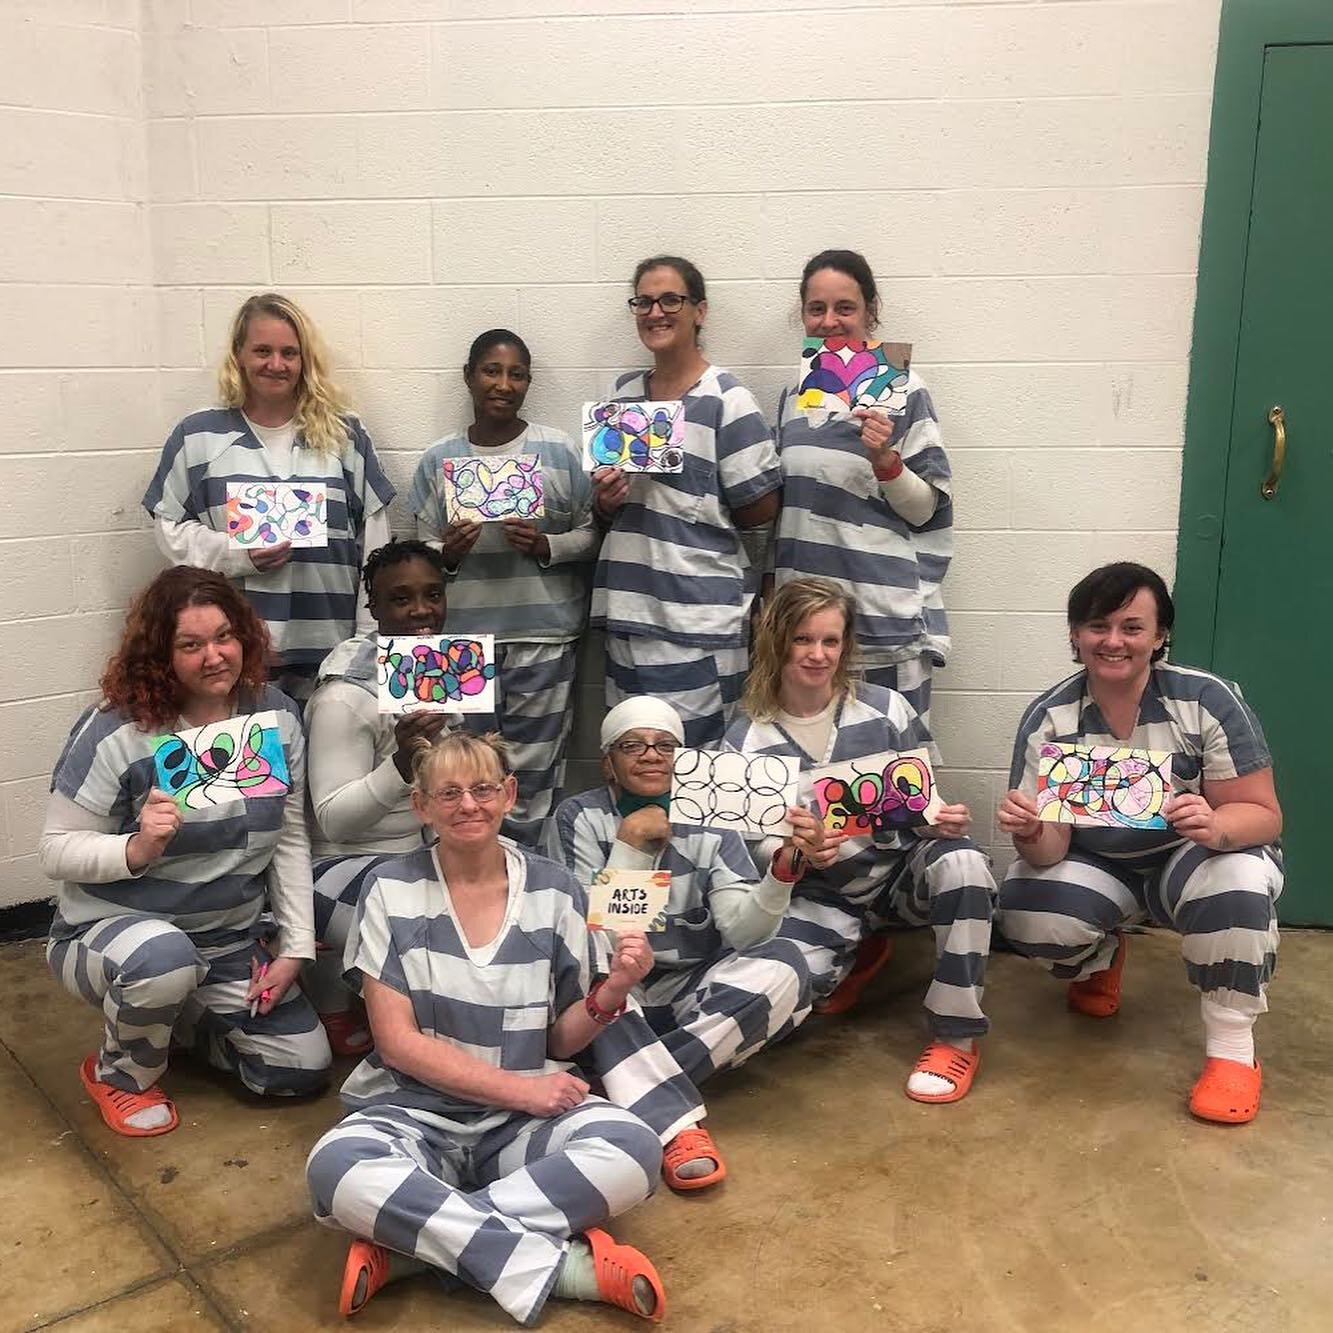 More neurographic art in a pod at the Maury County Jail